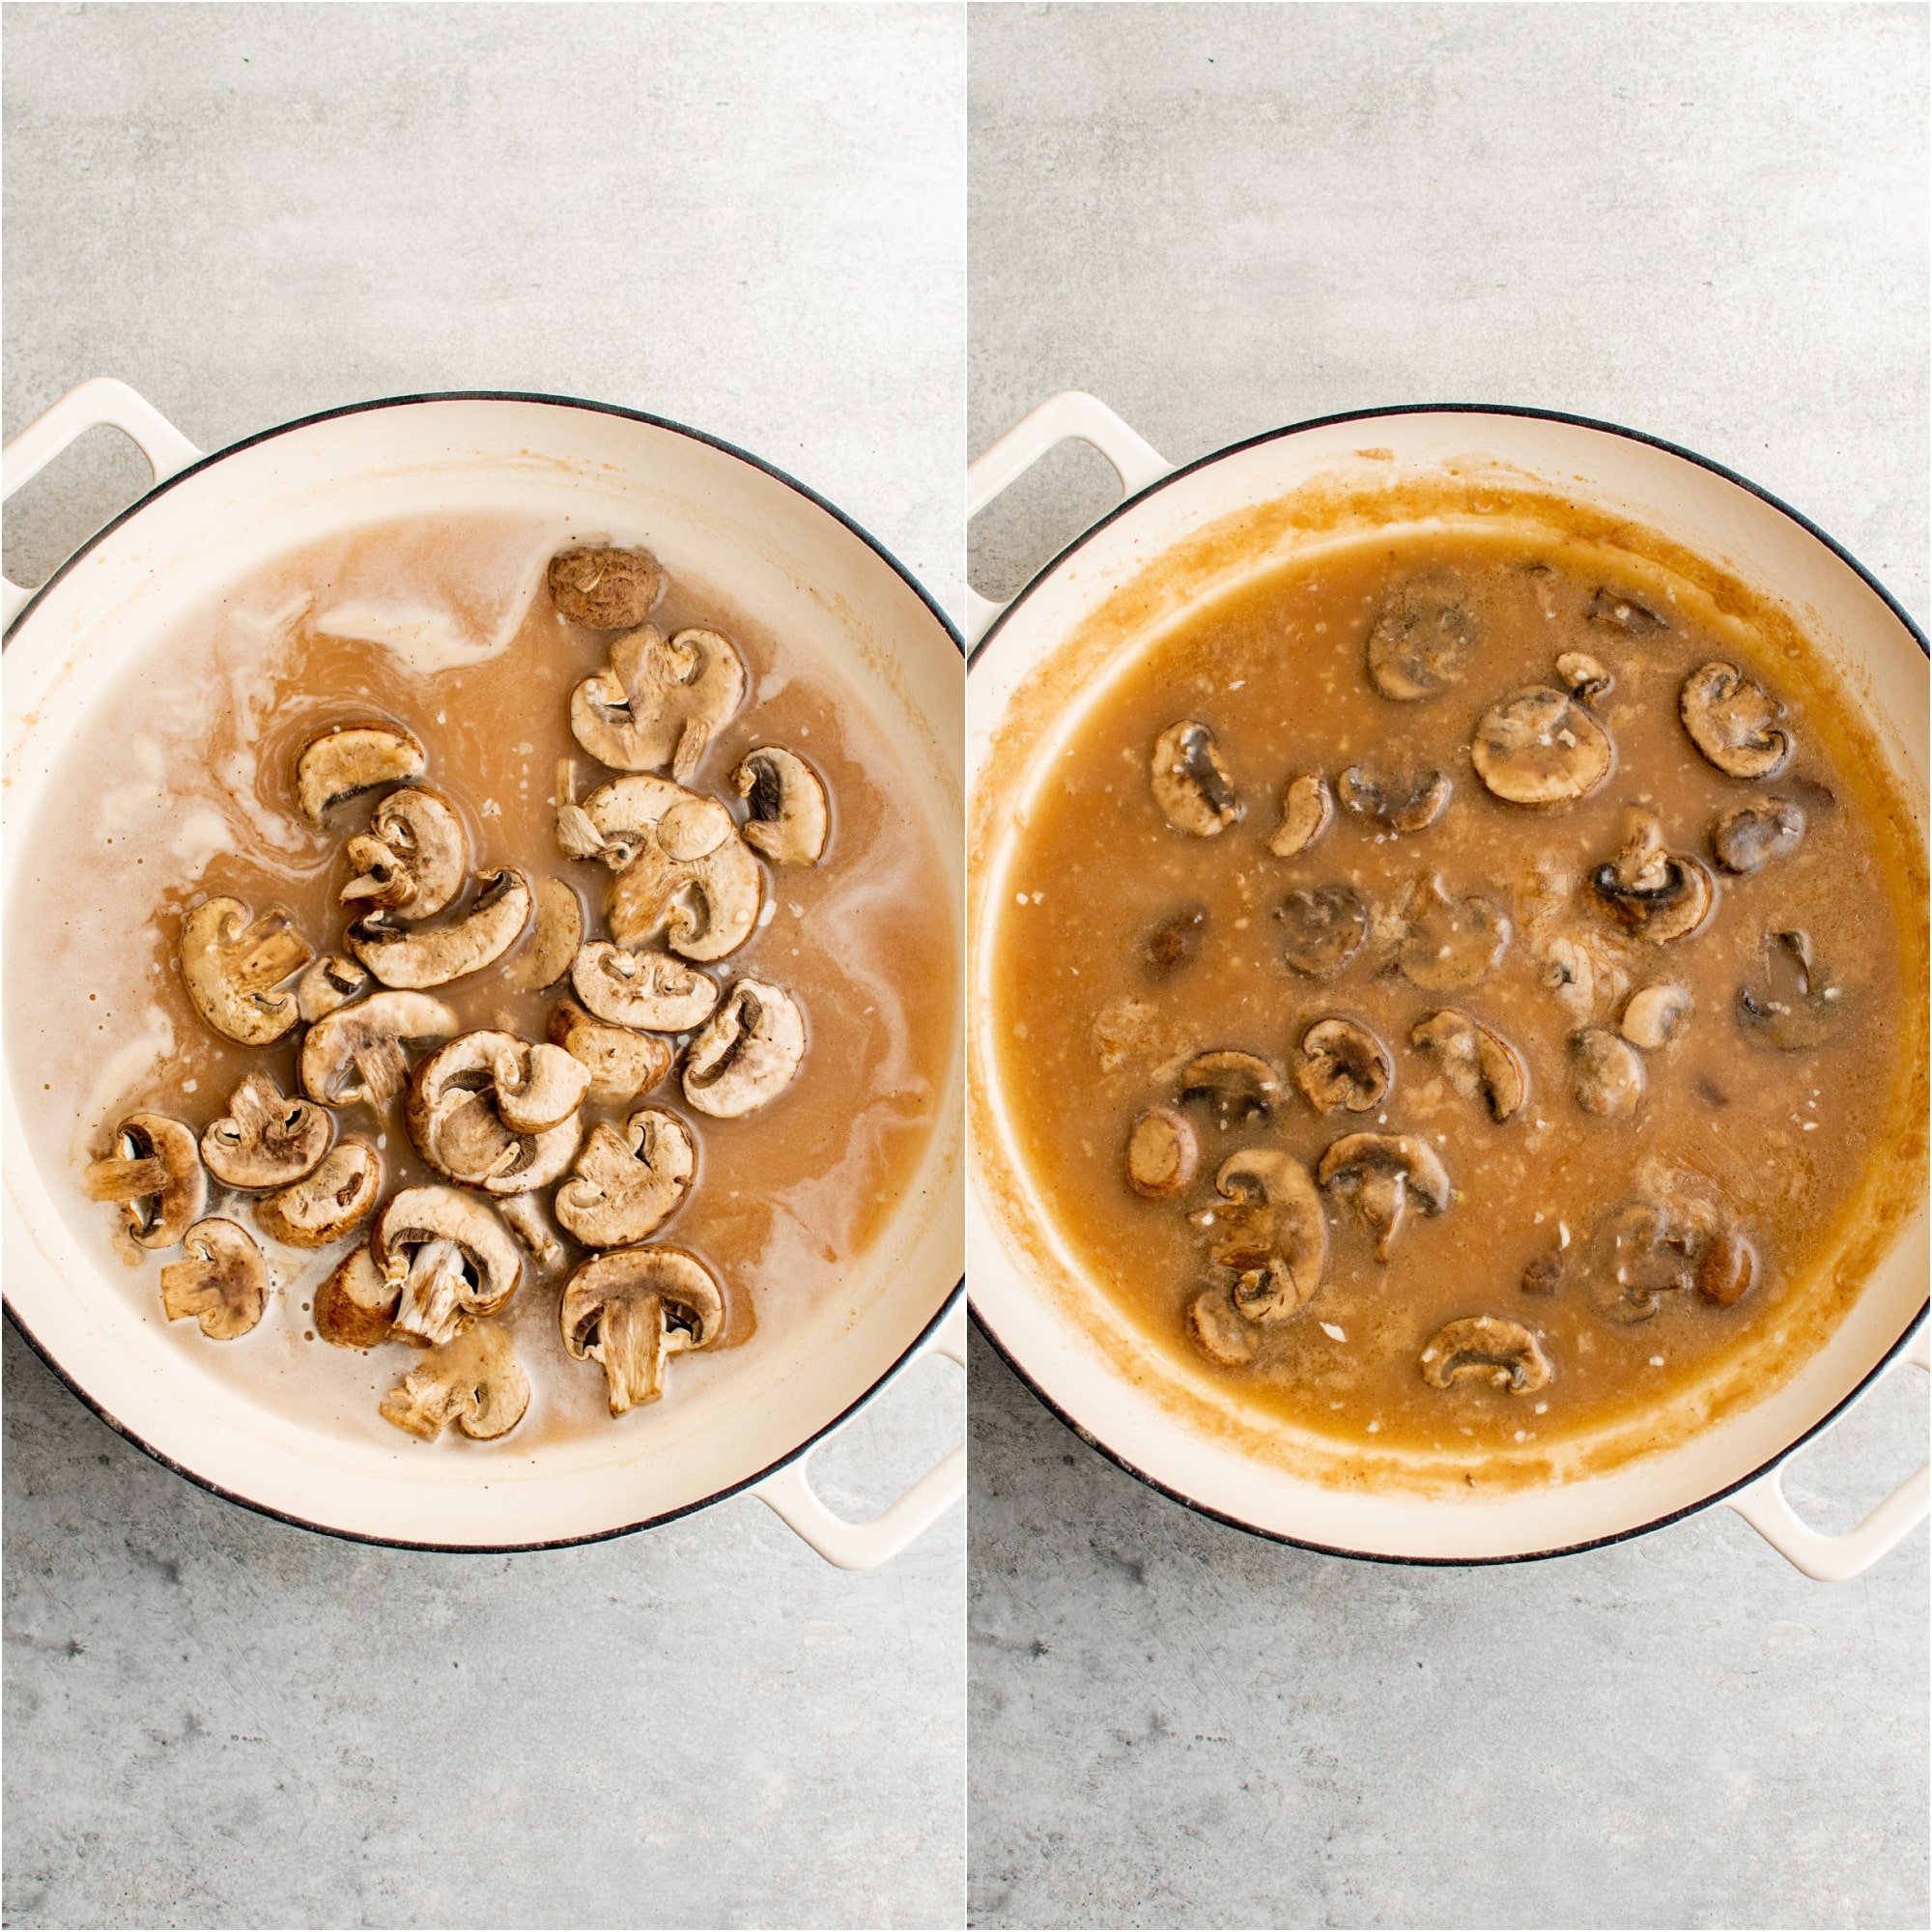 Two images: the first image shows sliced mushrooms just added to a pot filled with simmering marsala broth; the second image shows a large pot filled with mushrooms that have been simmering a marsala broth for 10 minutes.